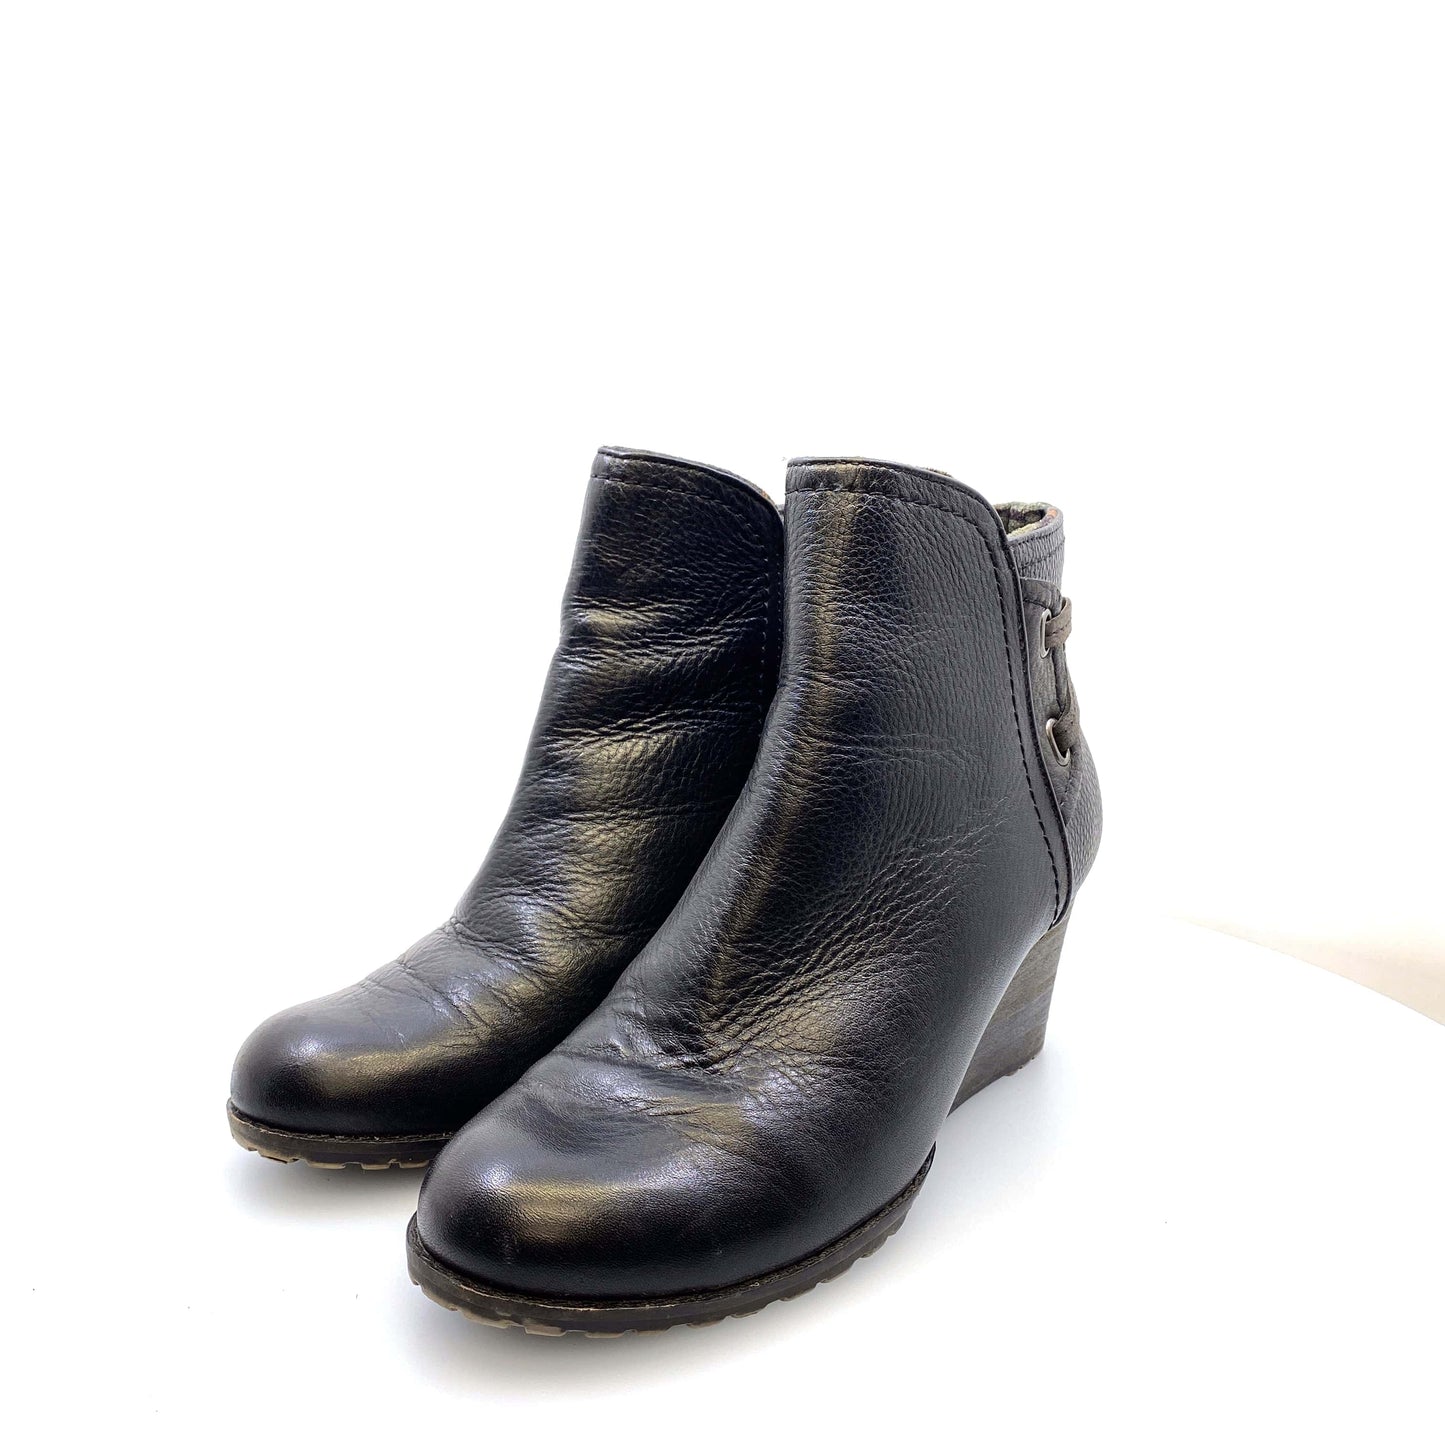 Cobb Hill by Rockport Womens “Lucinda” Size 8M Black Back Tie Boot Booties